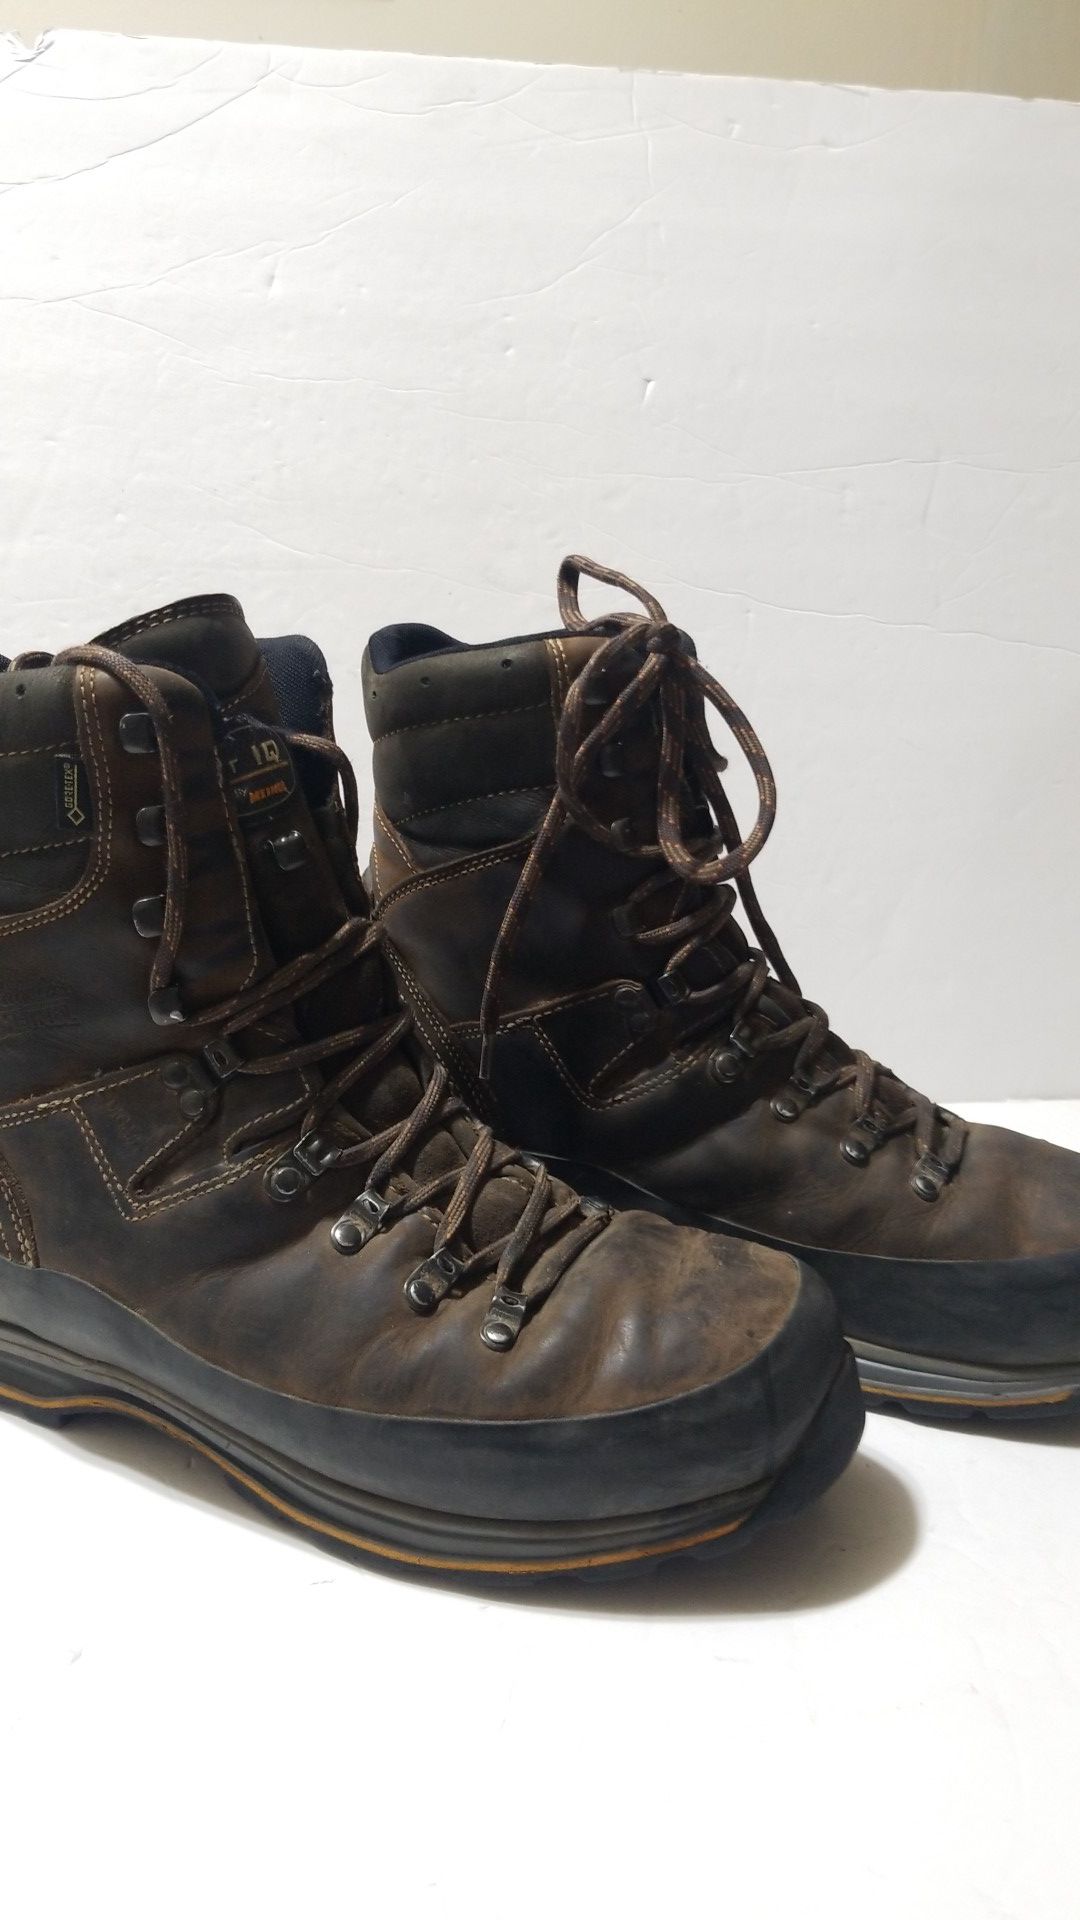 Free work Boots